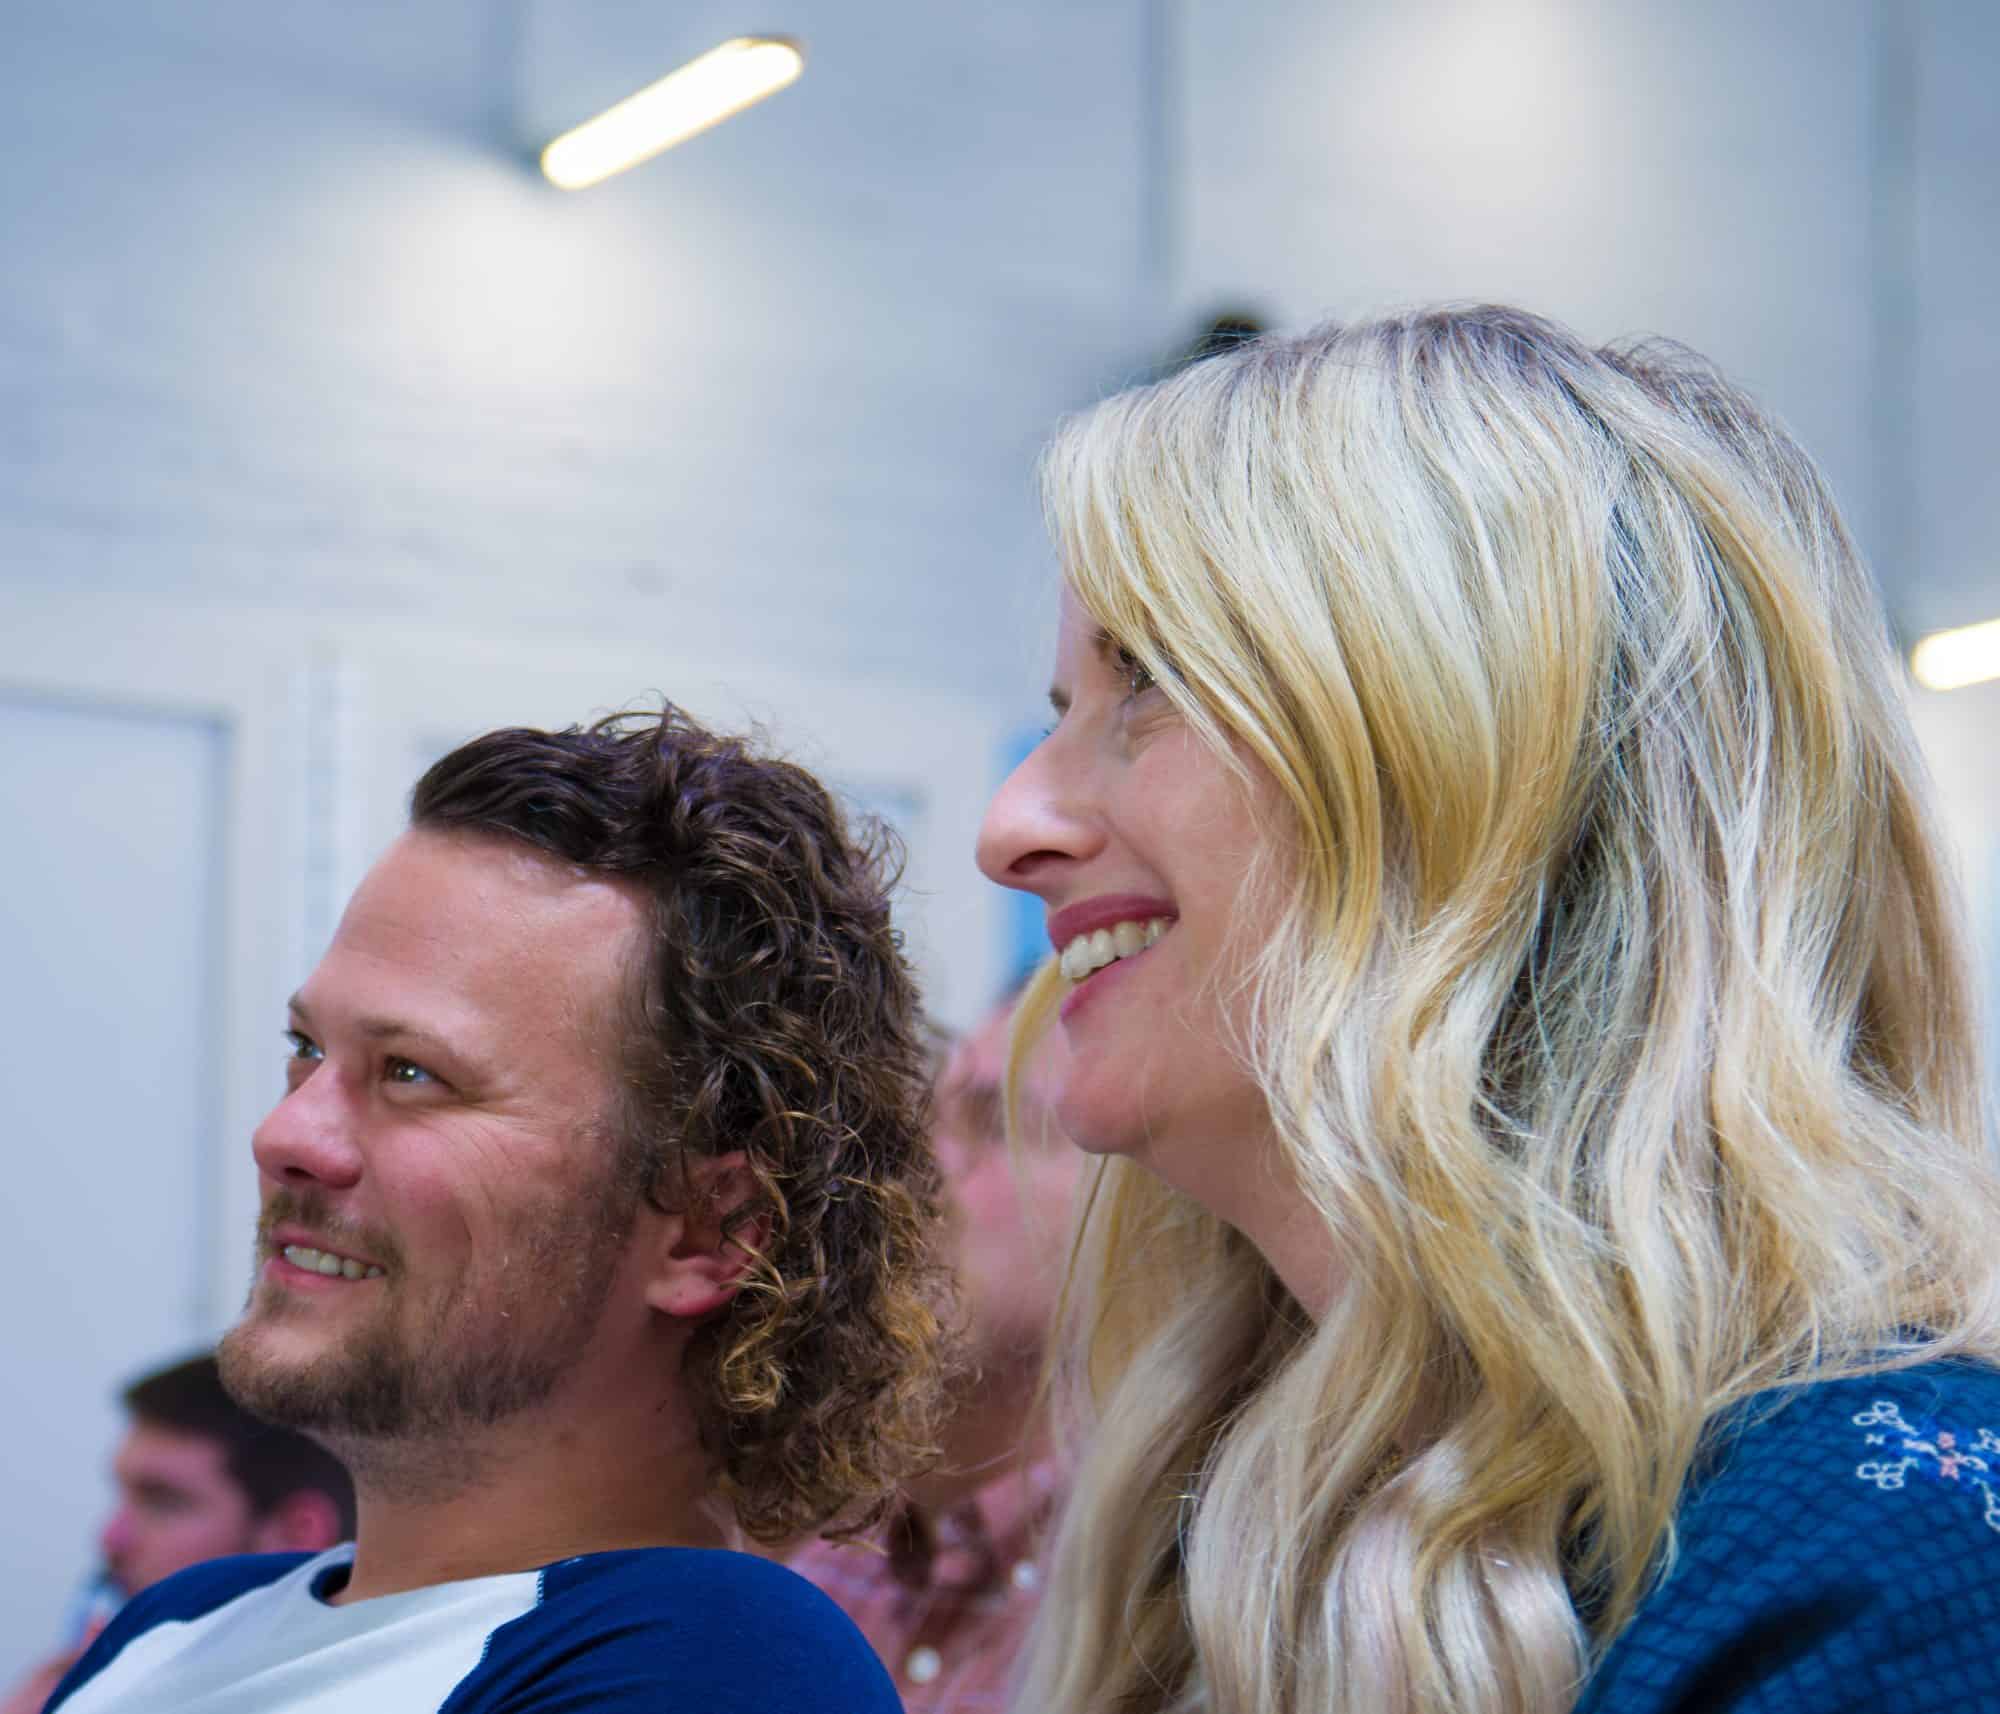 Two people smiling while listening to a company presentation